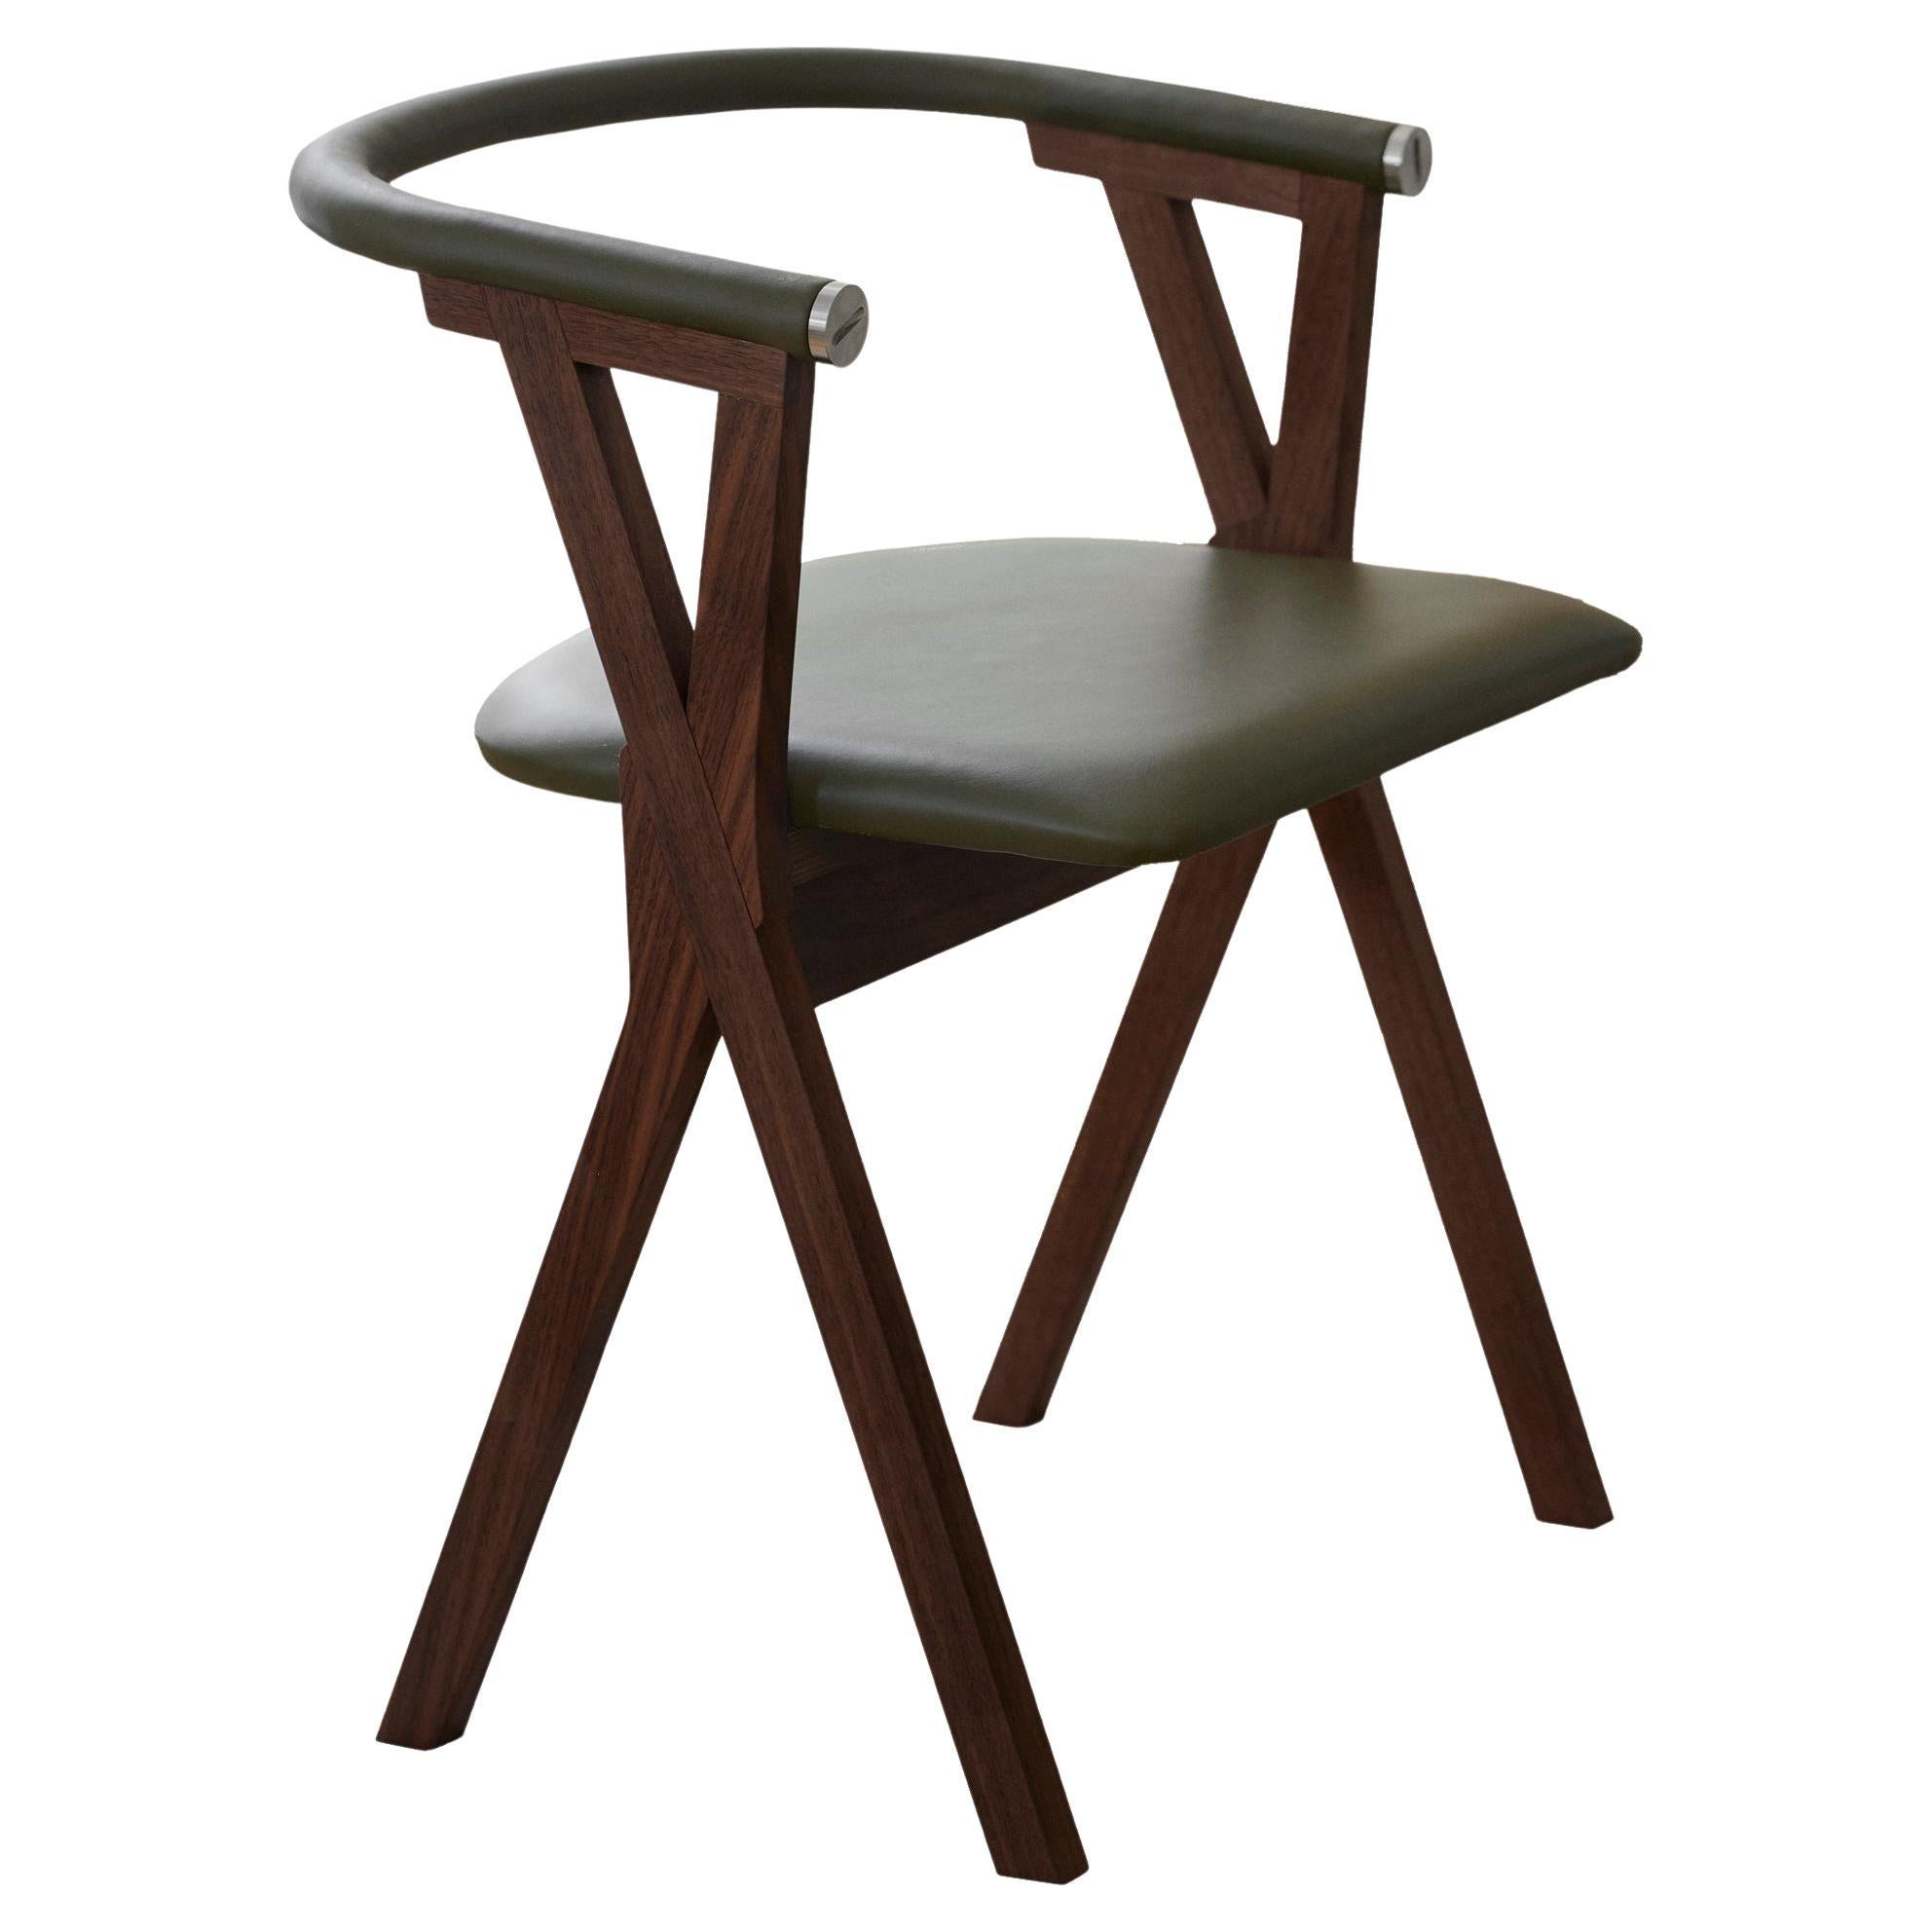 Contemporary Leather and Walnut Dining Chair by Per Soderberg